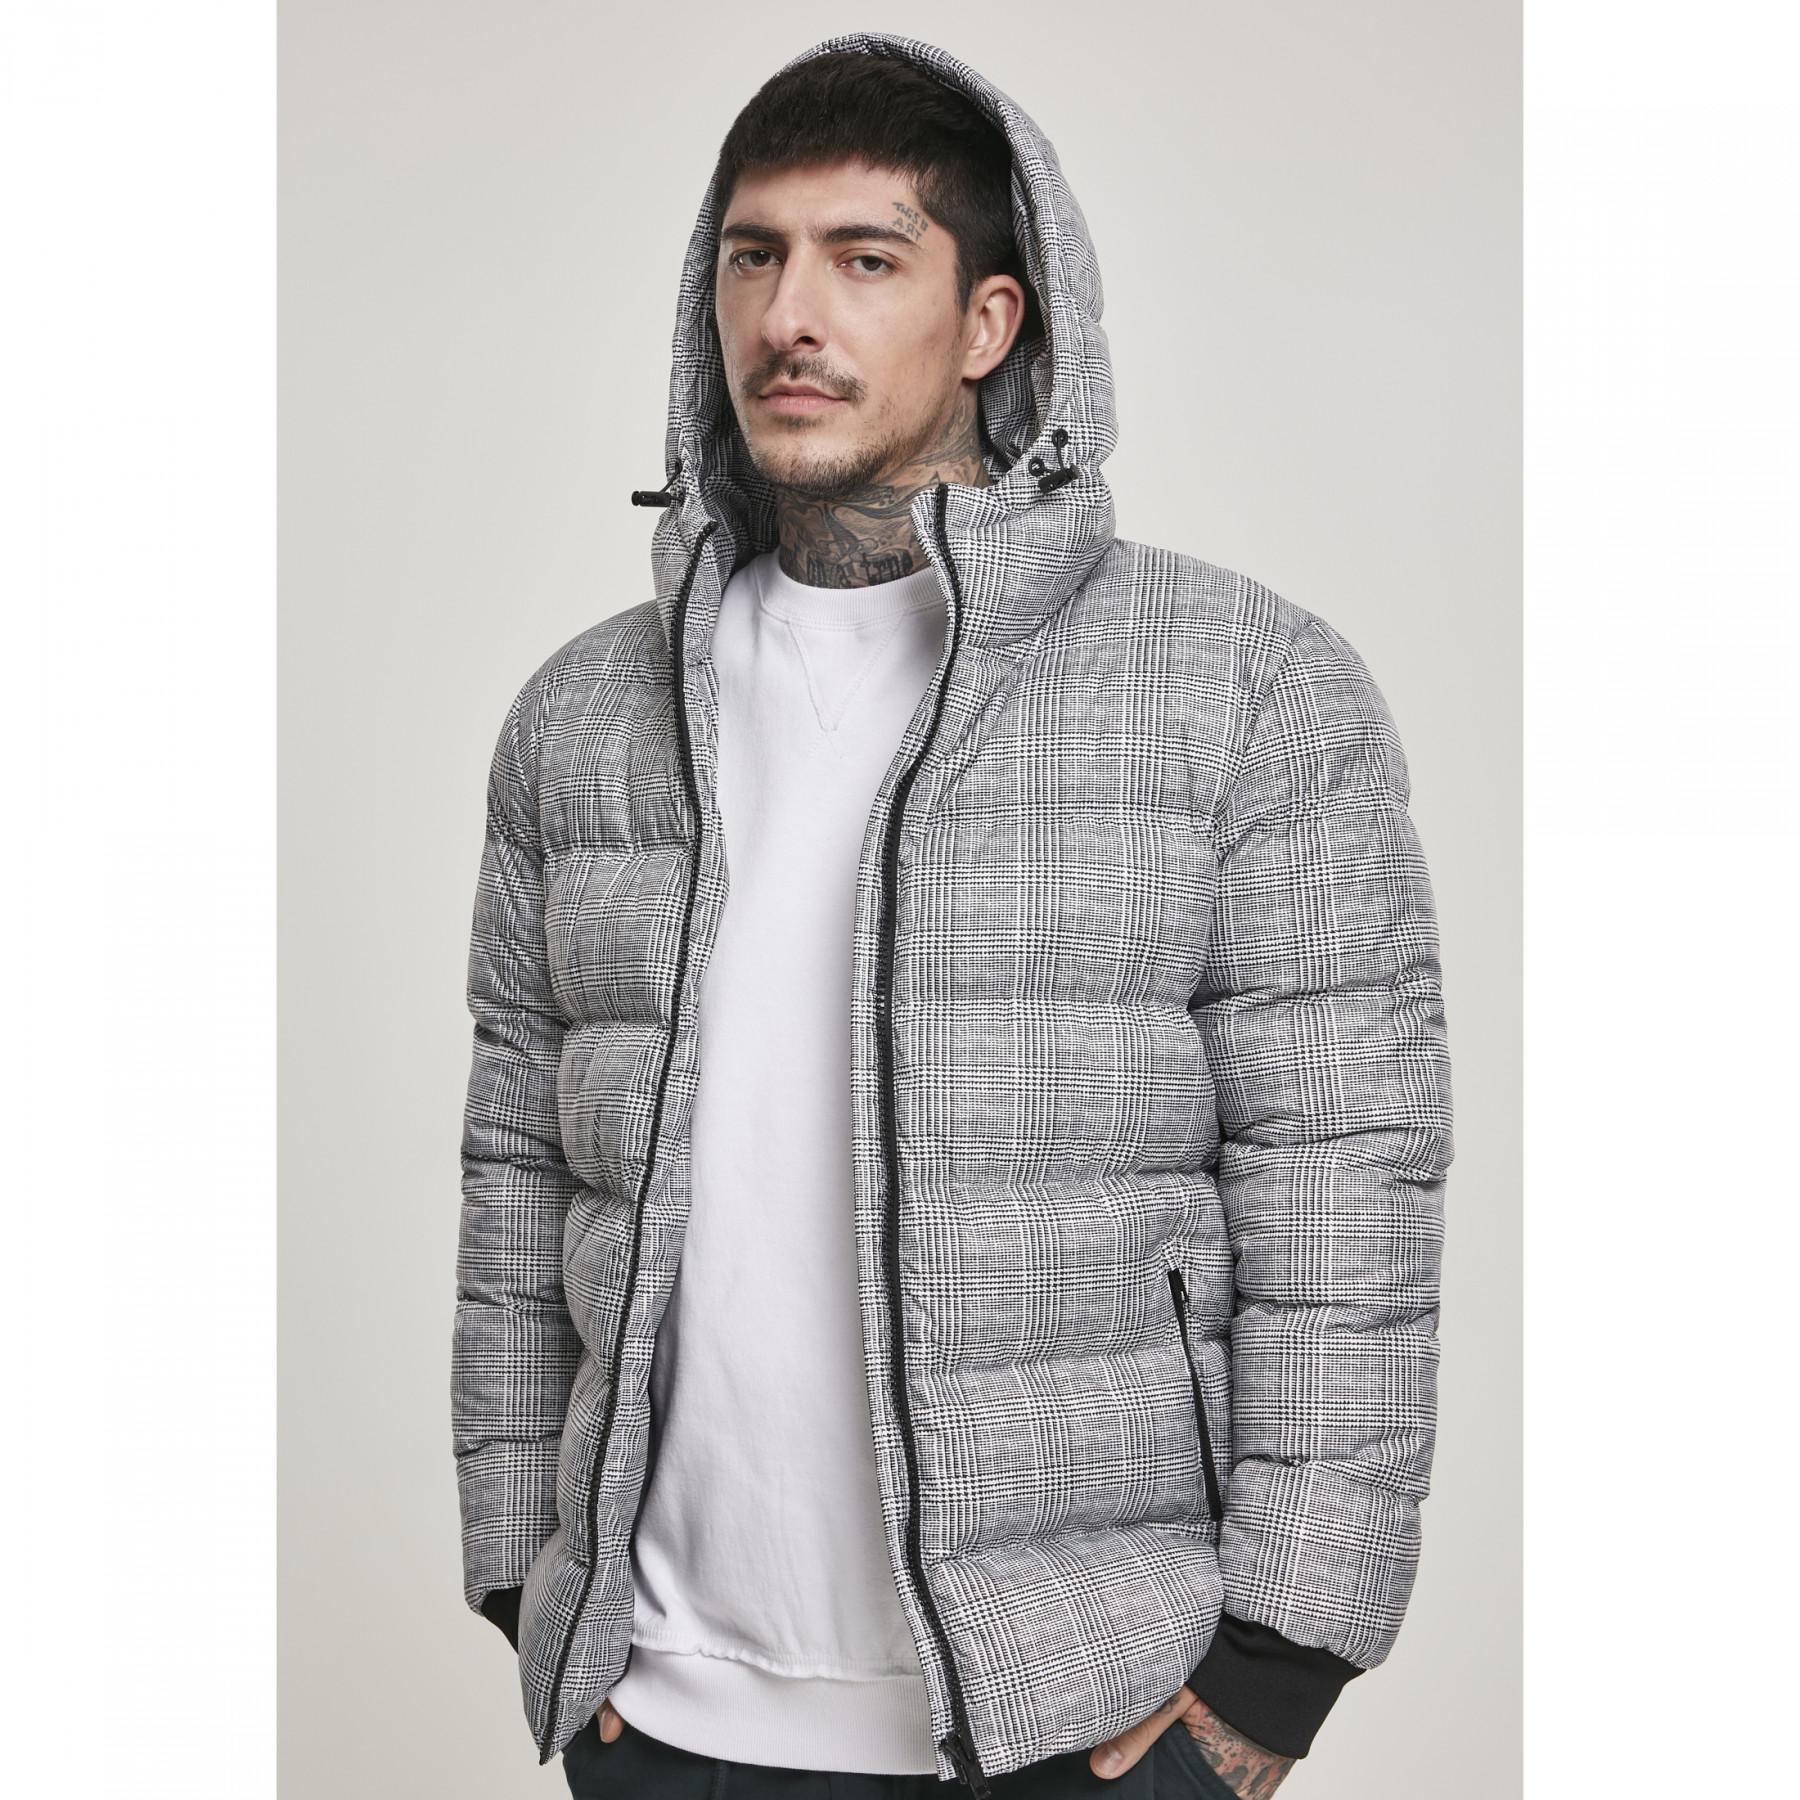 Parka Urban Classic hooded Check